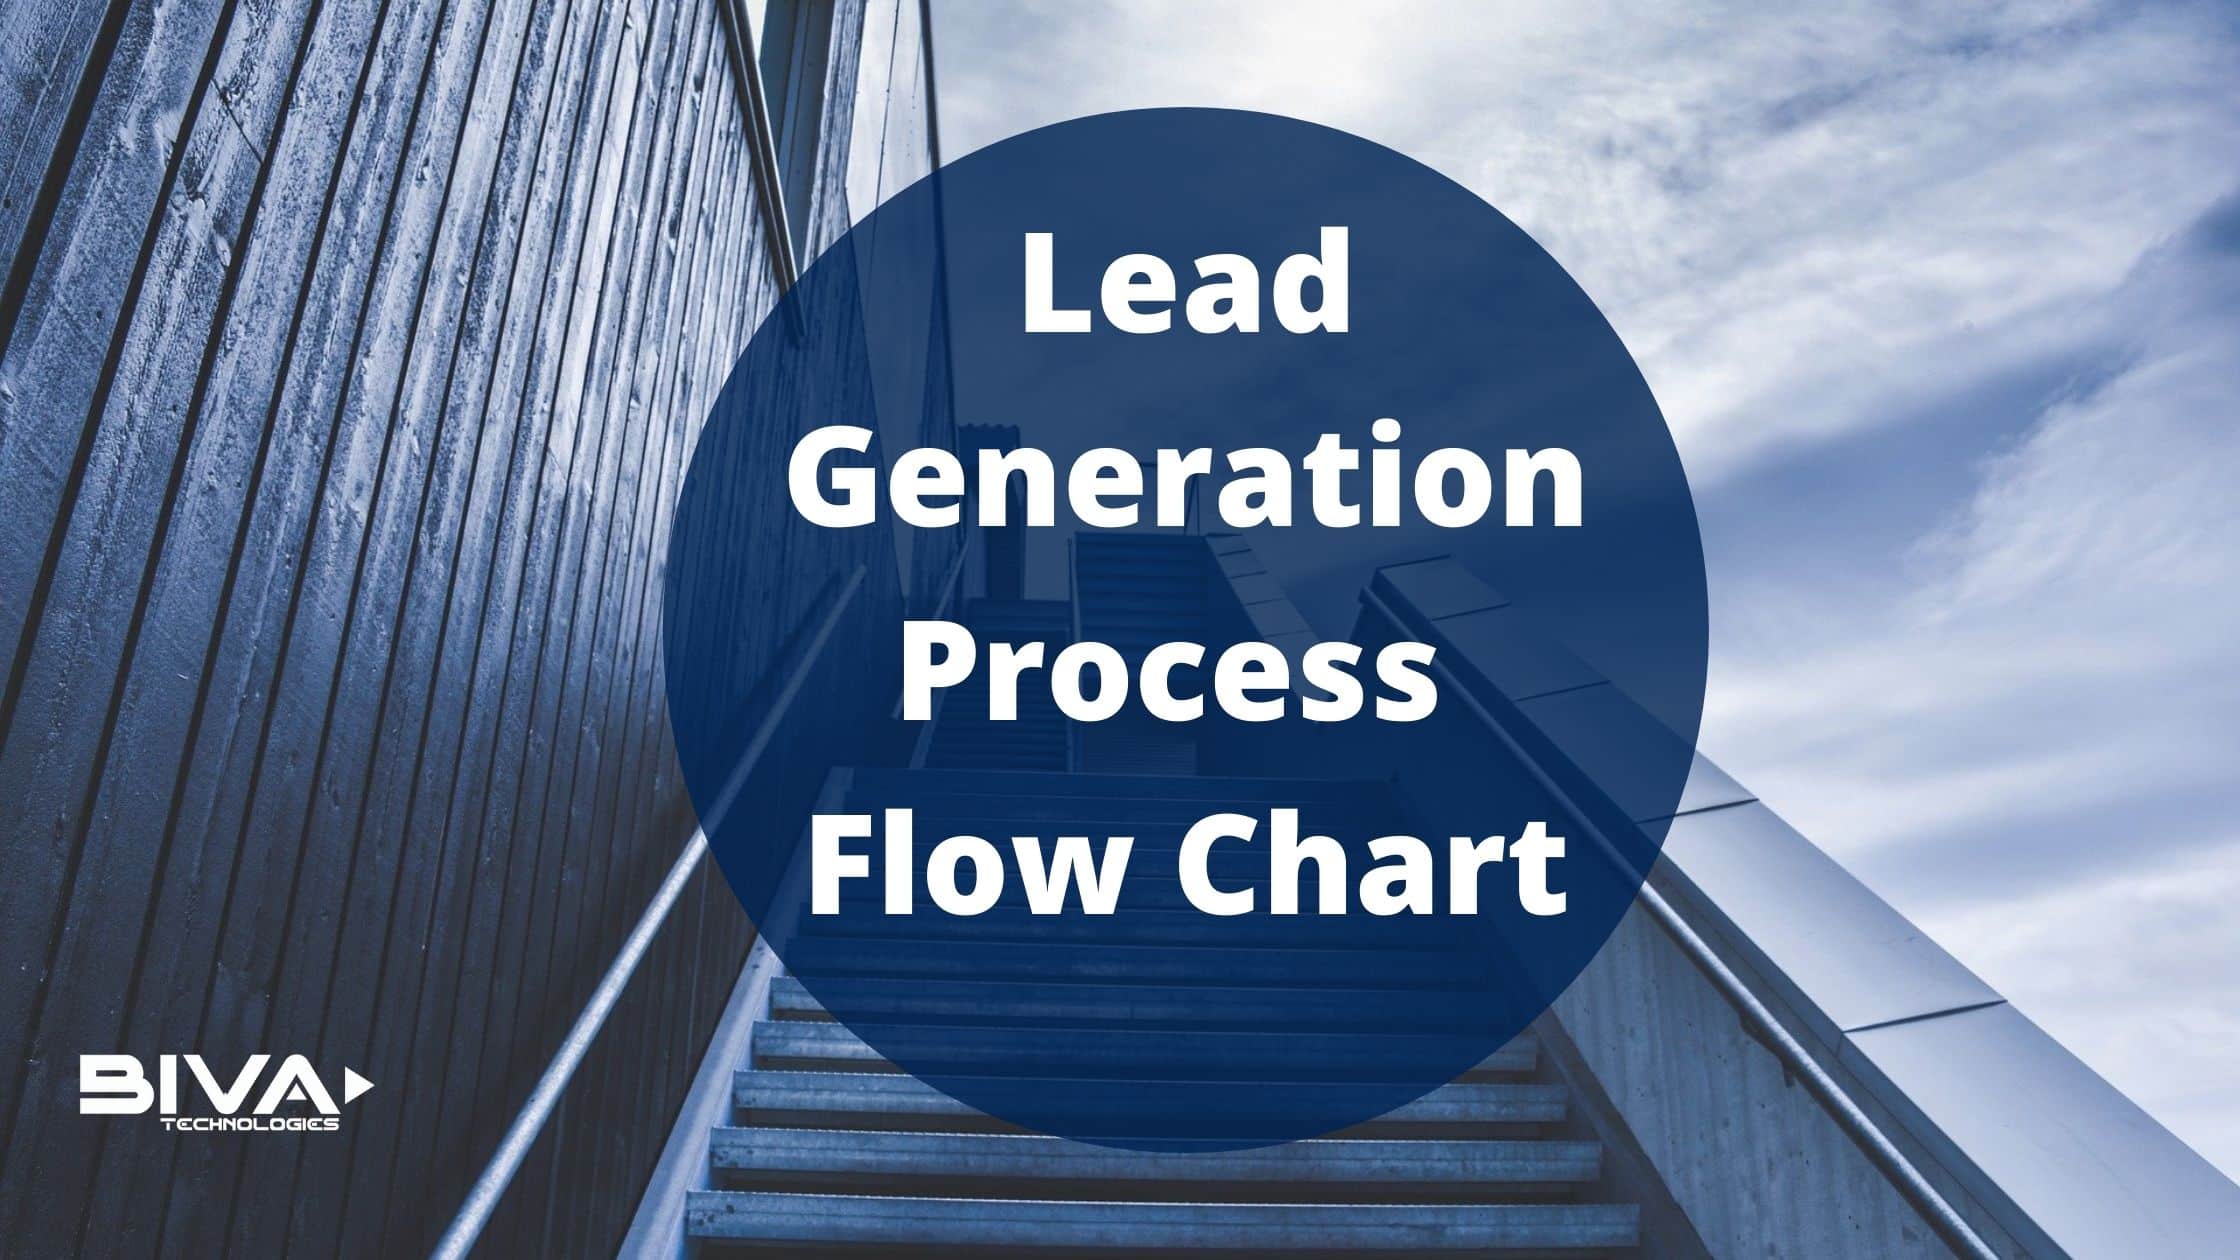 100% Potential Lead Generation Process Flow Chart for SME